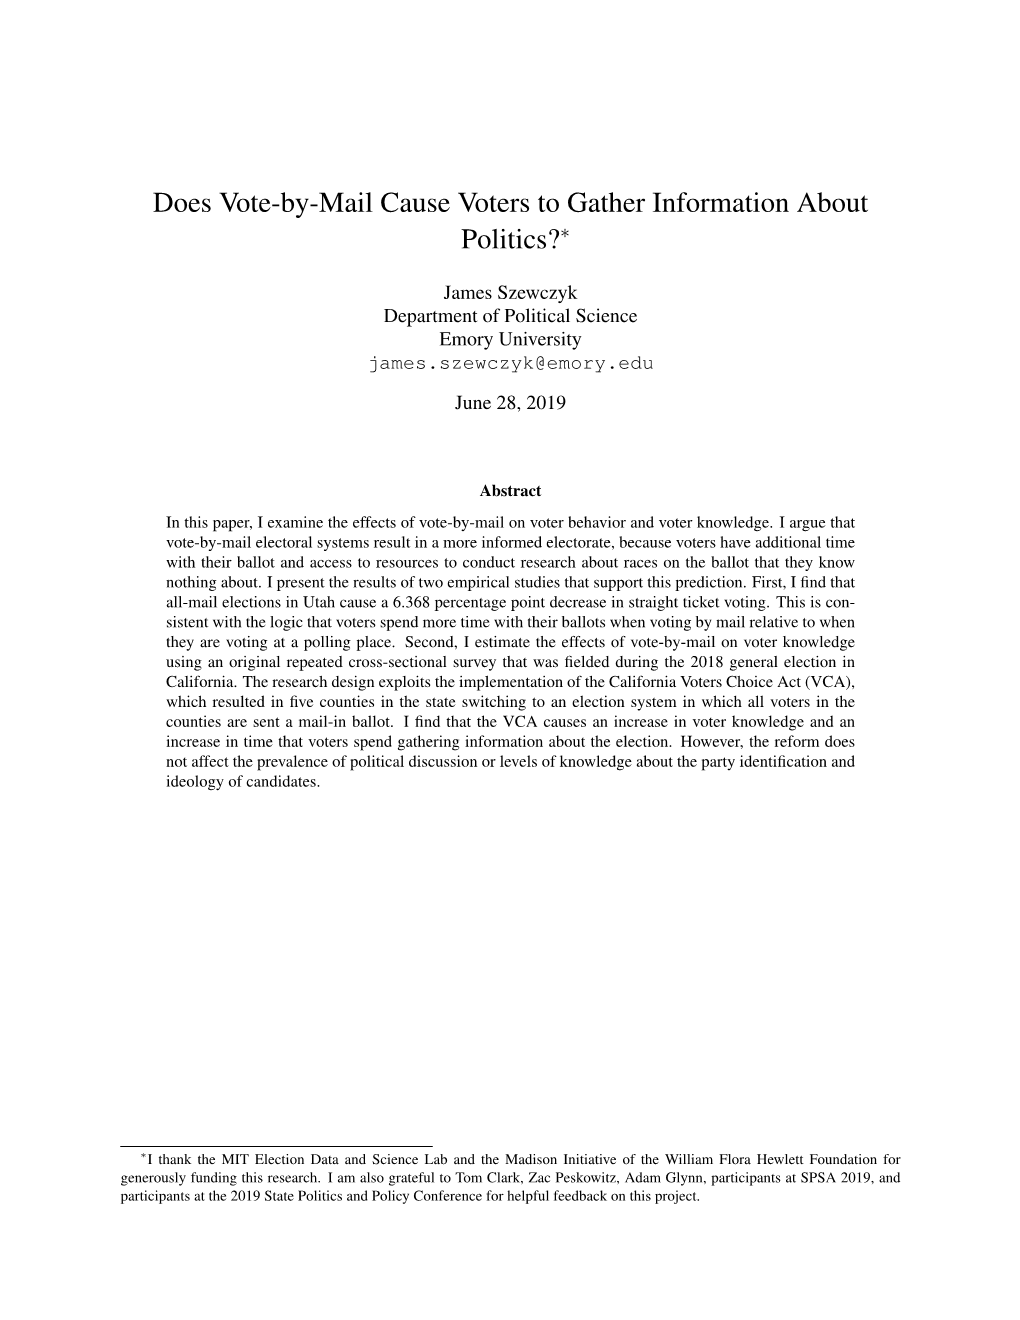 Does Vote-By-Mail Cause Voters to Gather Information About Politics?∗